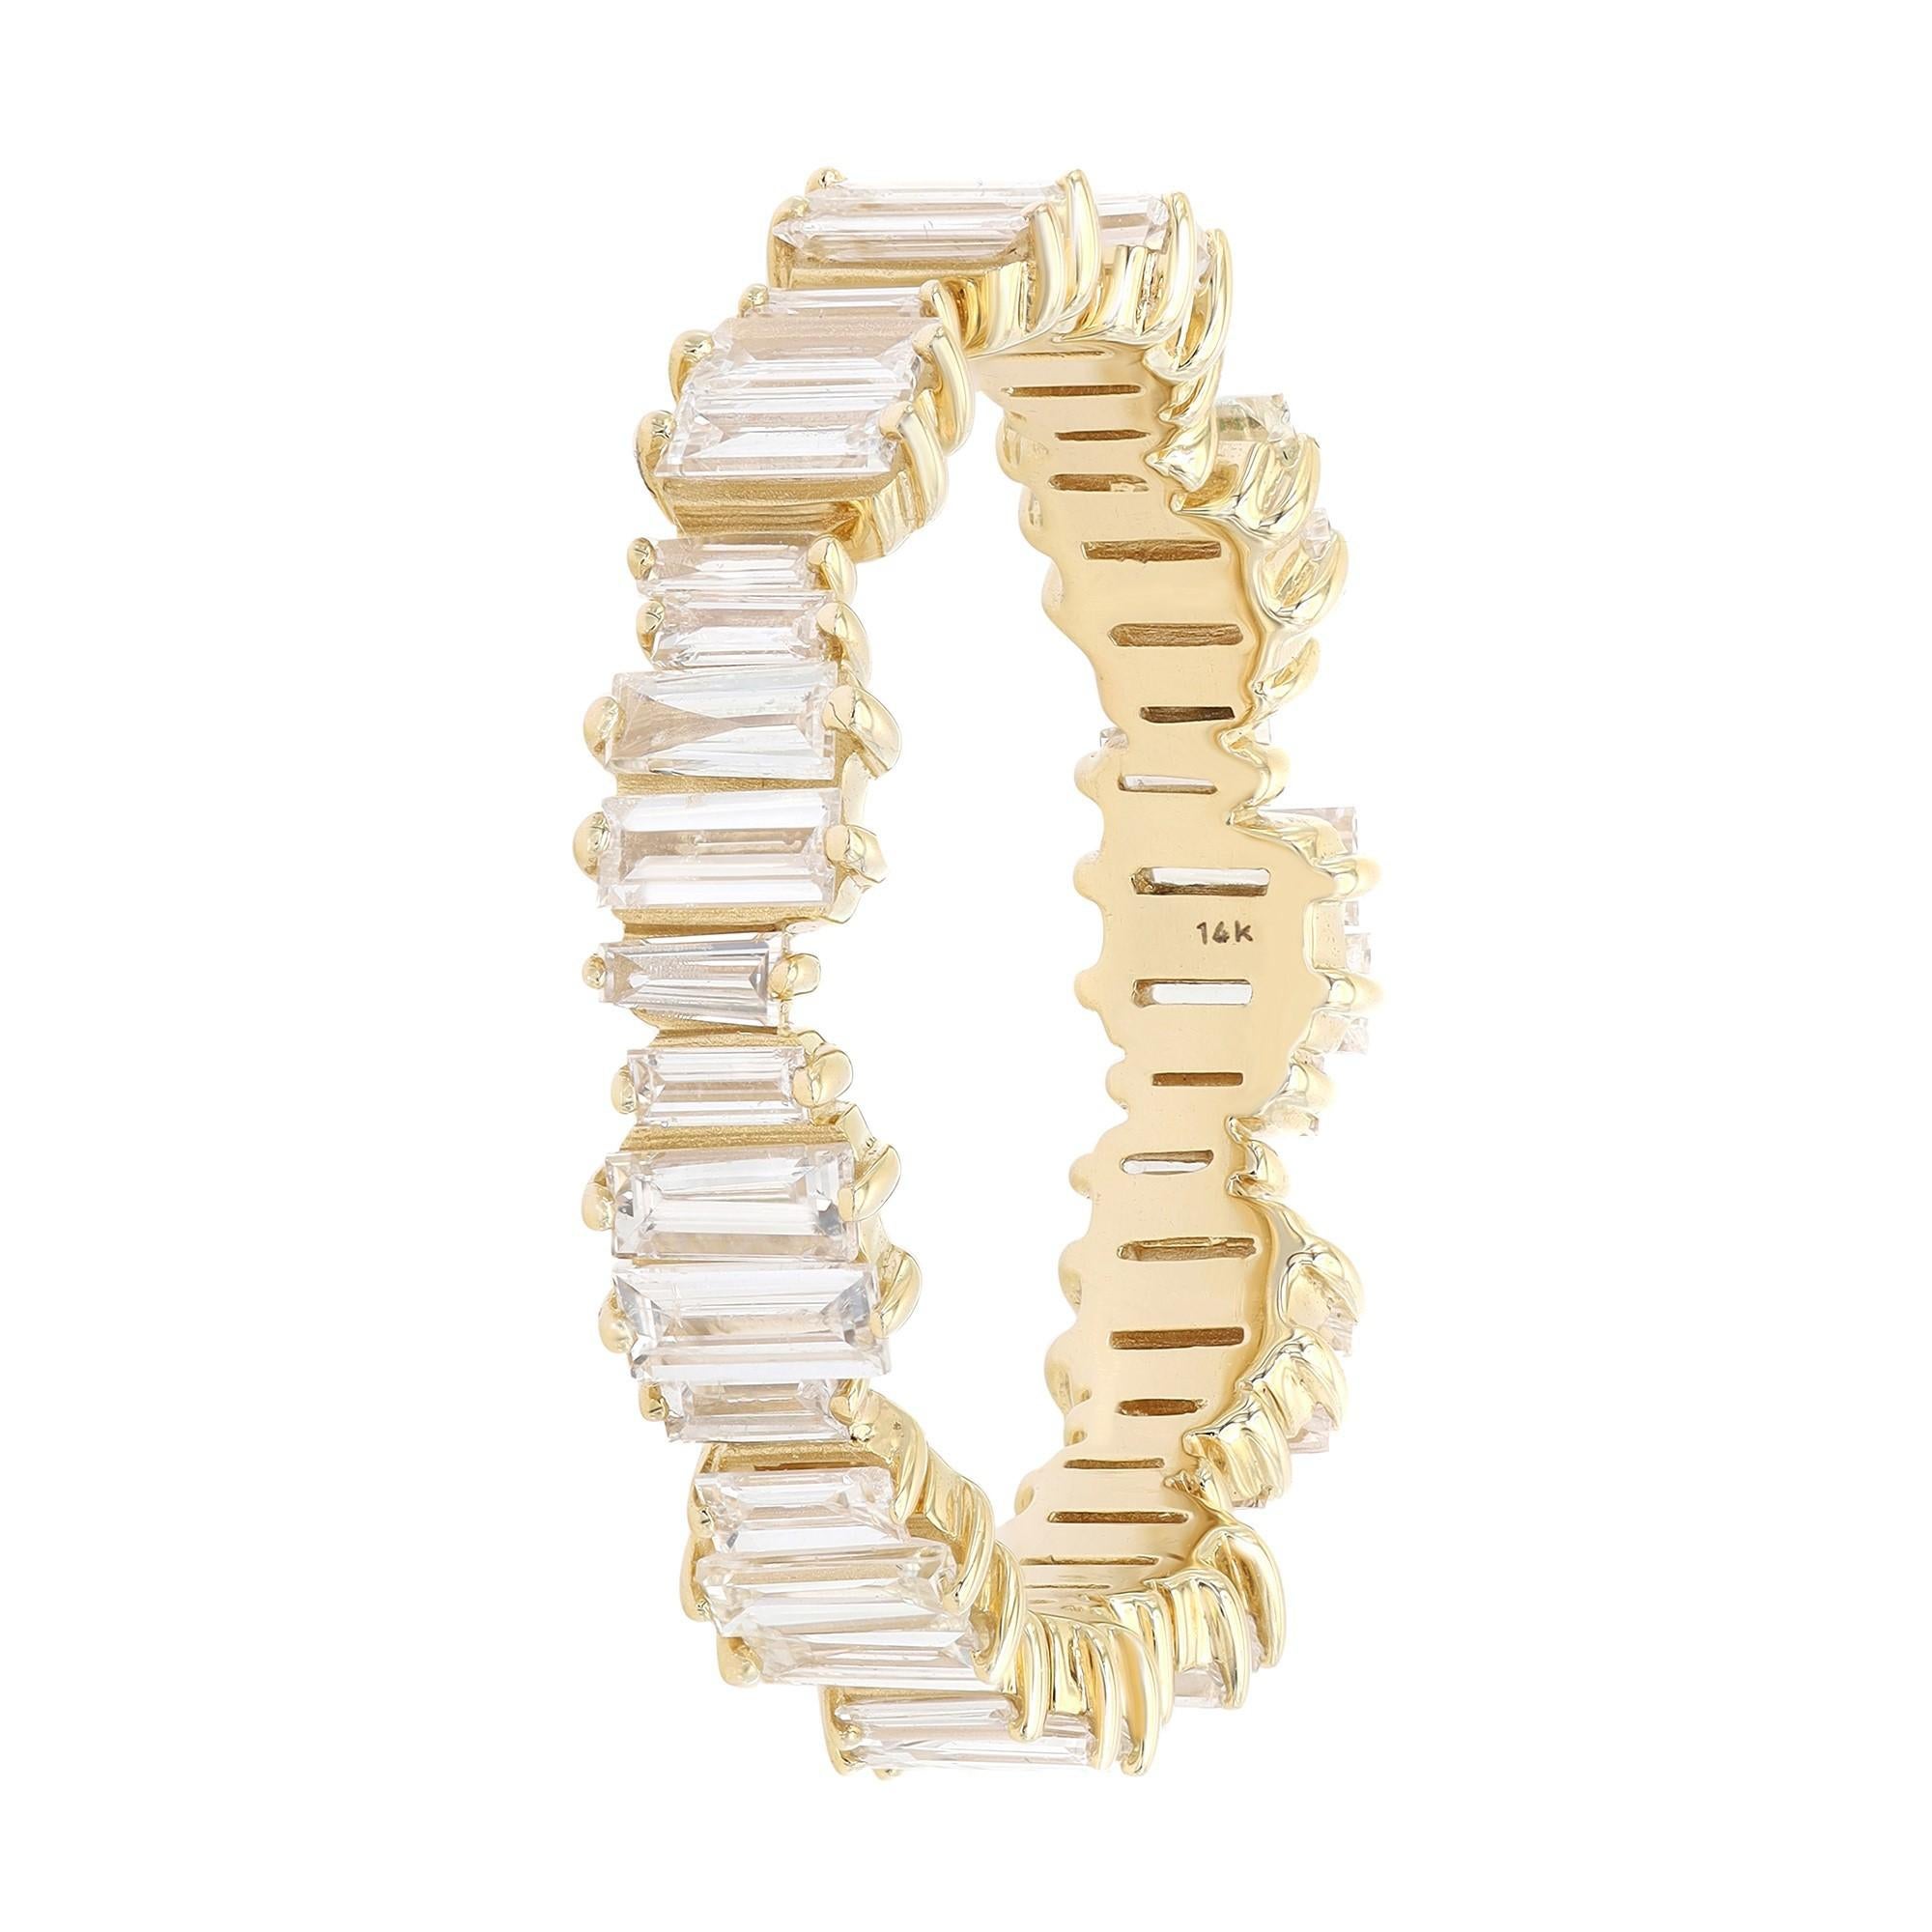 This simple and sophisticated diamond eternity band is crafted in 14k yellow gold. Features 44 prong set baguette cut diamonds set all through the ring portraying a timeless, eye-catching style. It's stackable and easy to mix and match. Diamond